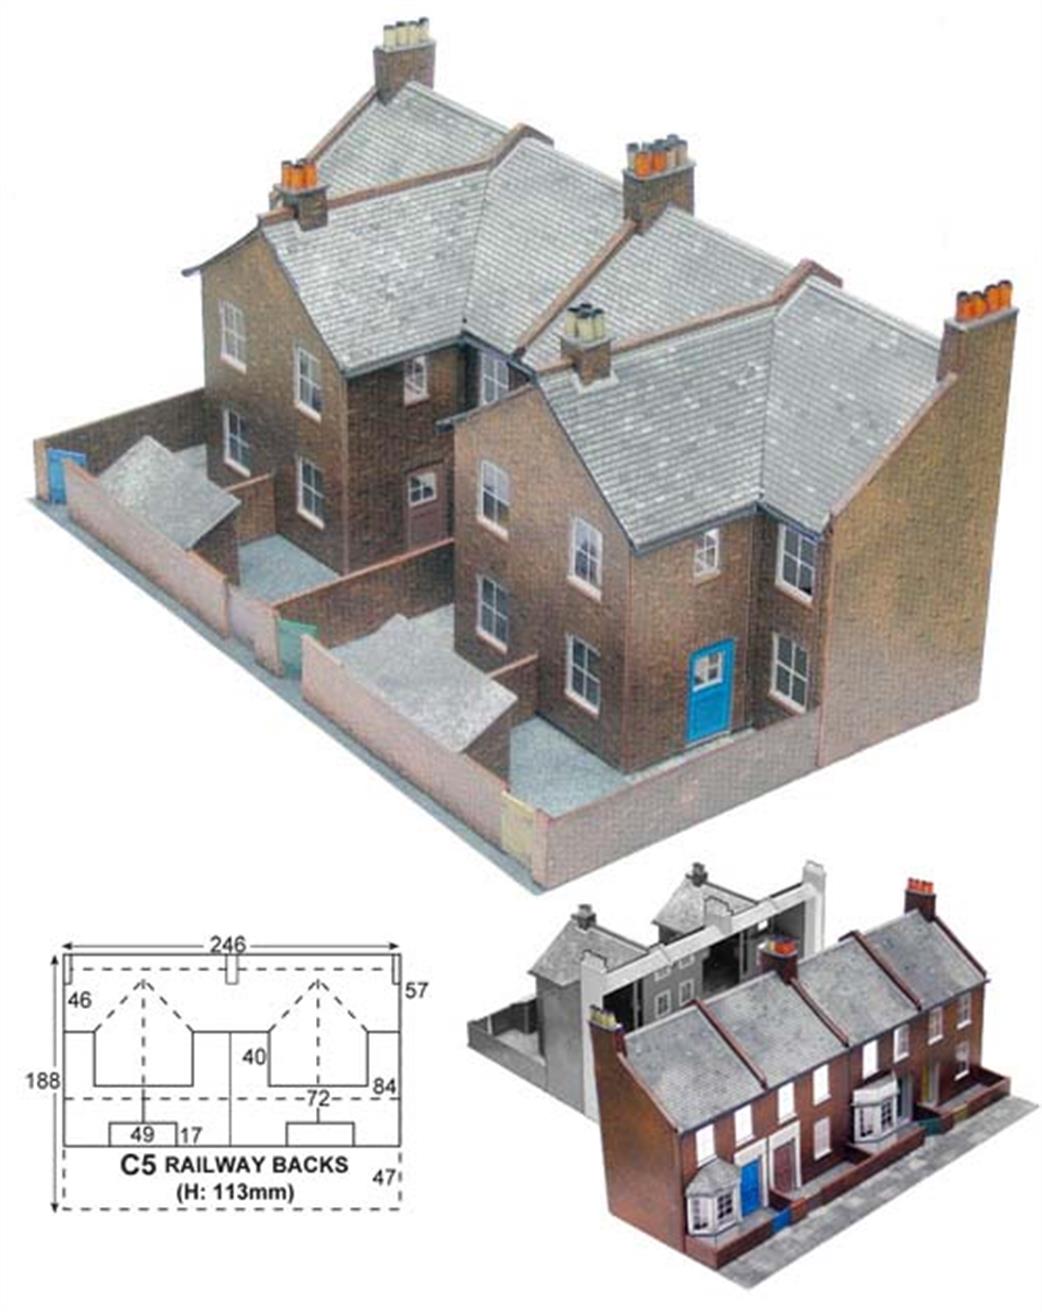 Superquick OO C5 Redbrick Terraced House Backs (Low Relief) Printed Card Kit